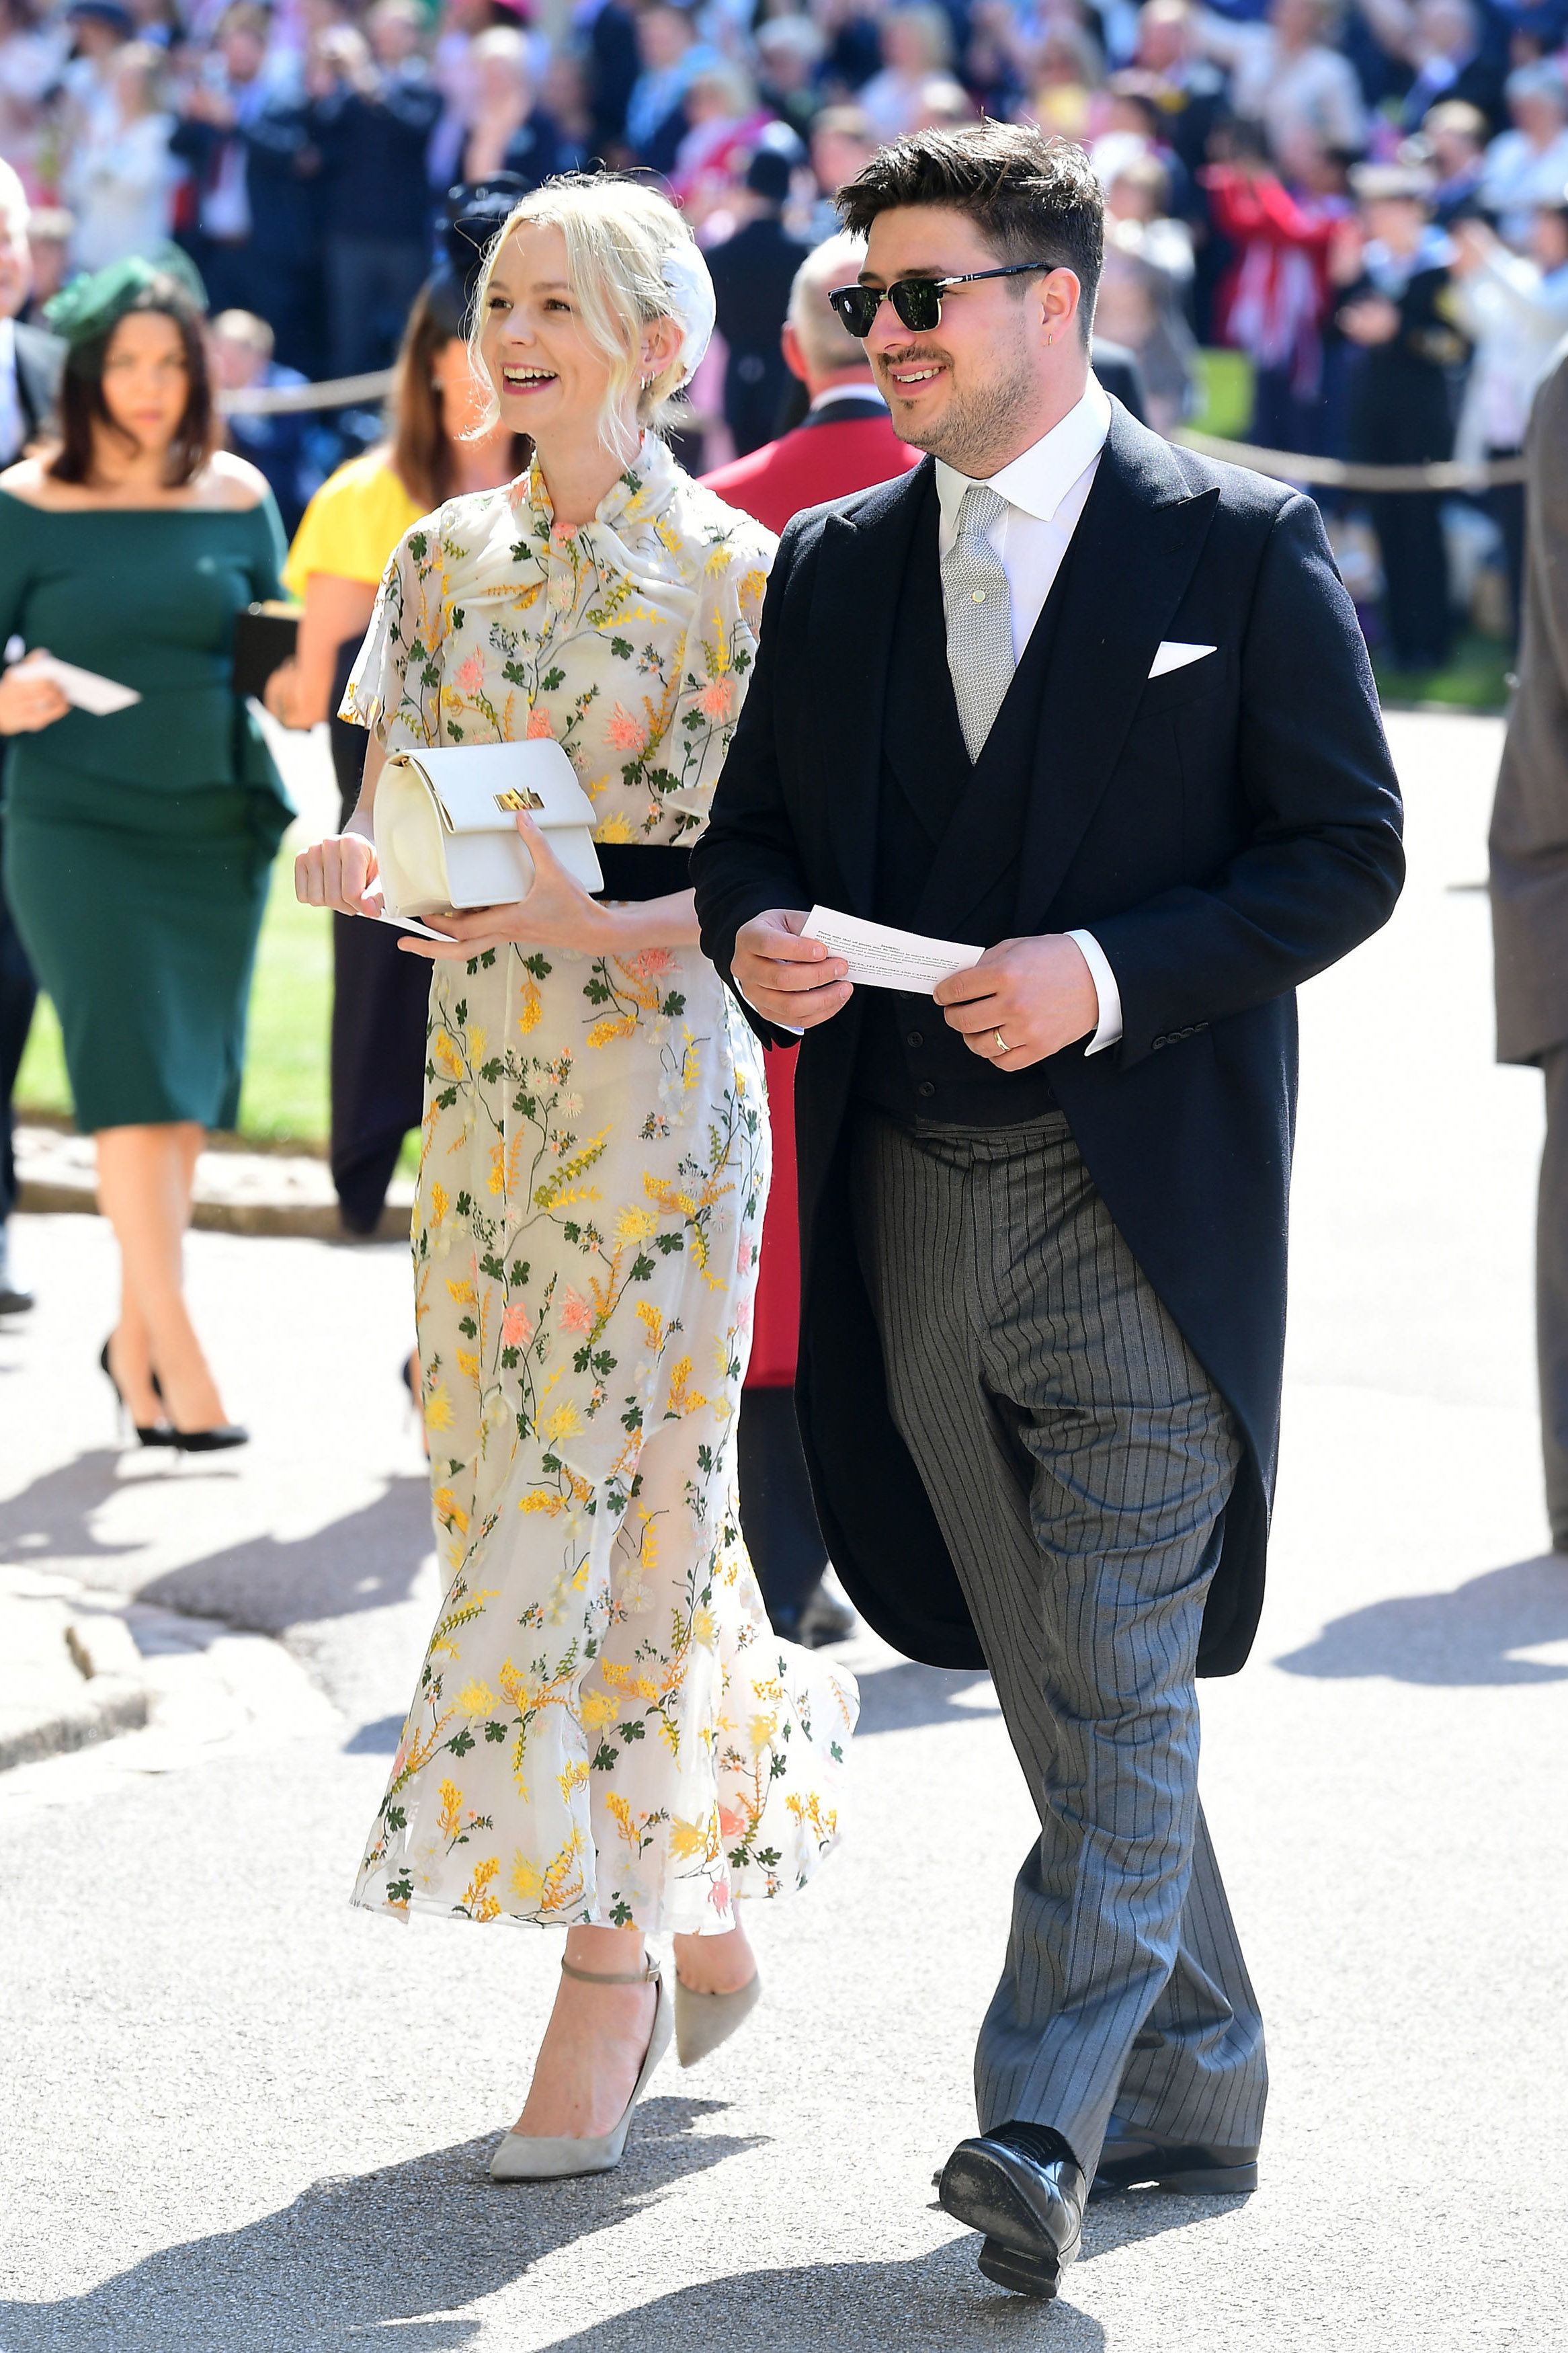 All Royal Wedding Best Dressed Guests - Prince Harry and Meghan